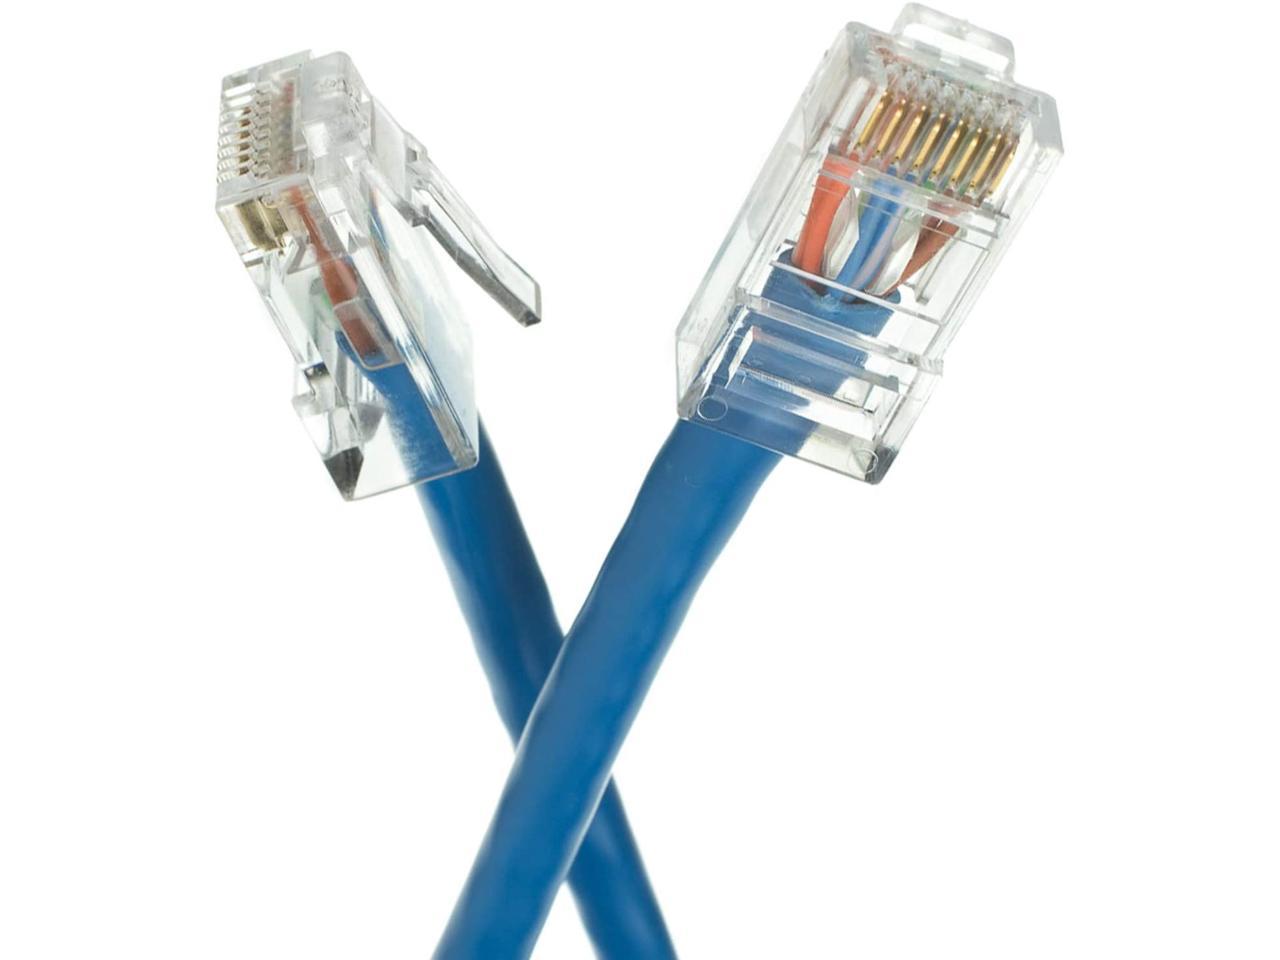 Orange 50-Pack - 12 Feet GOWOS Cat5e Ethernet Cable 1Gigabit/Sec High Speed LAN Internet/Patch Cable 350MHz 24AWG Network Cable with Gold Plated RJ45 Non-Booted Connector 